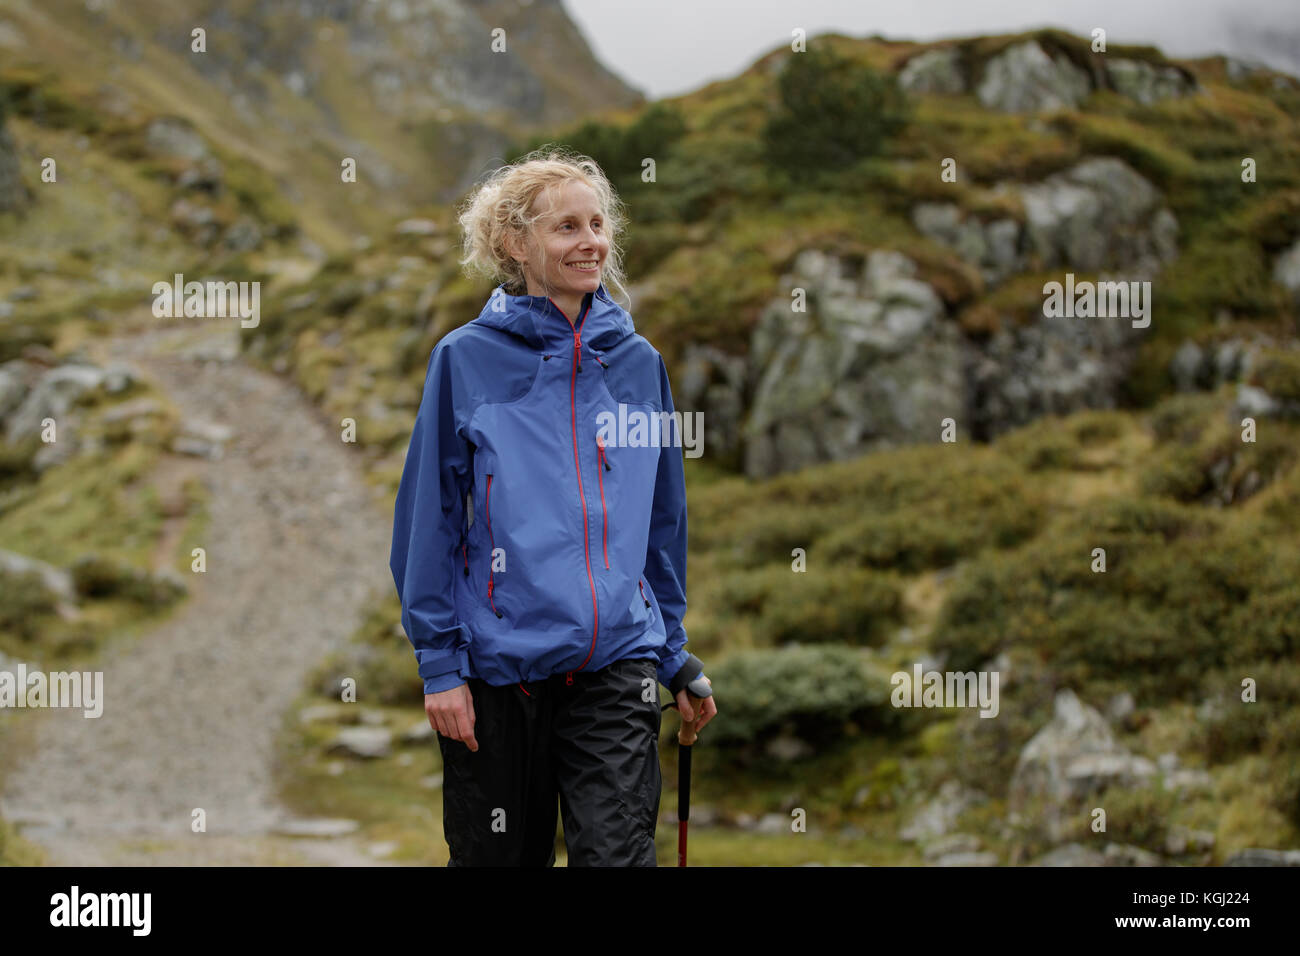 A woman hiking in the Austrian Mountains Stock Photo